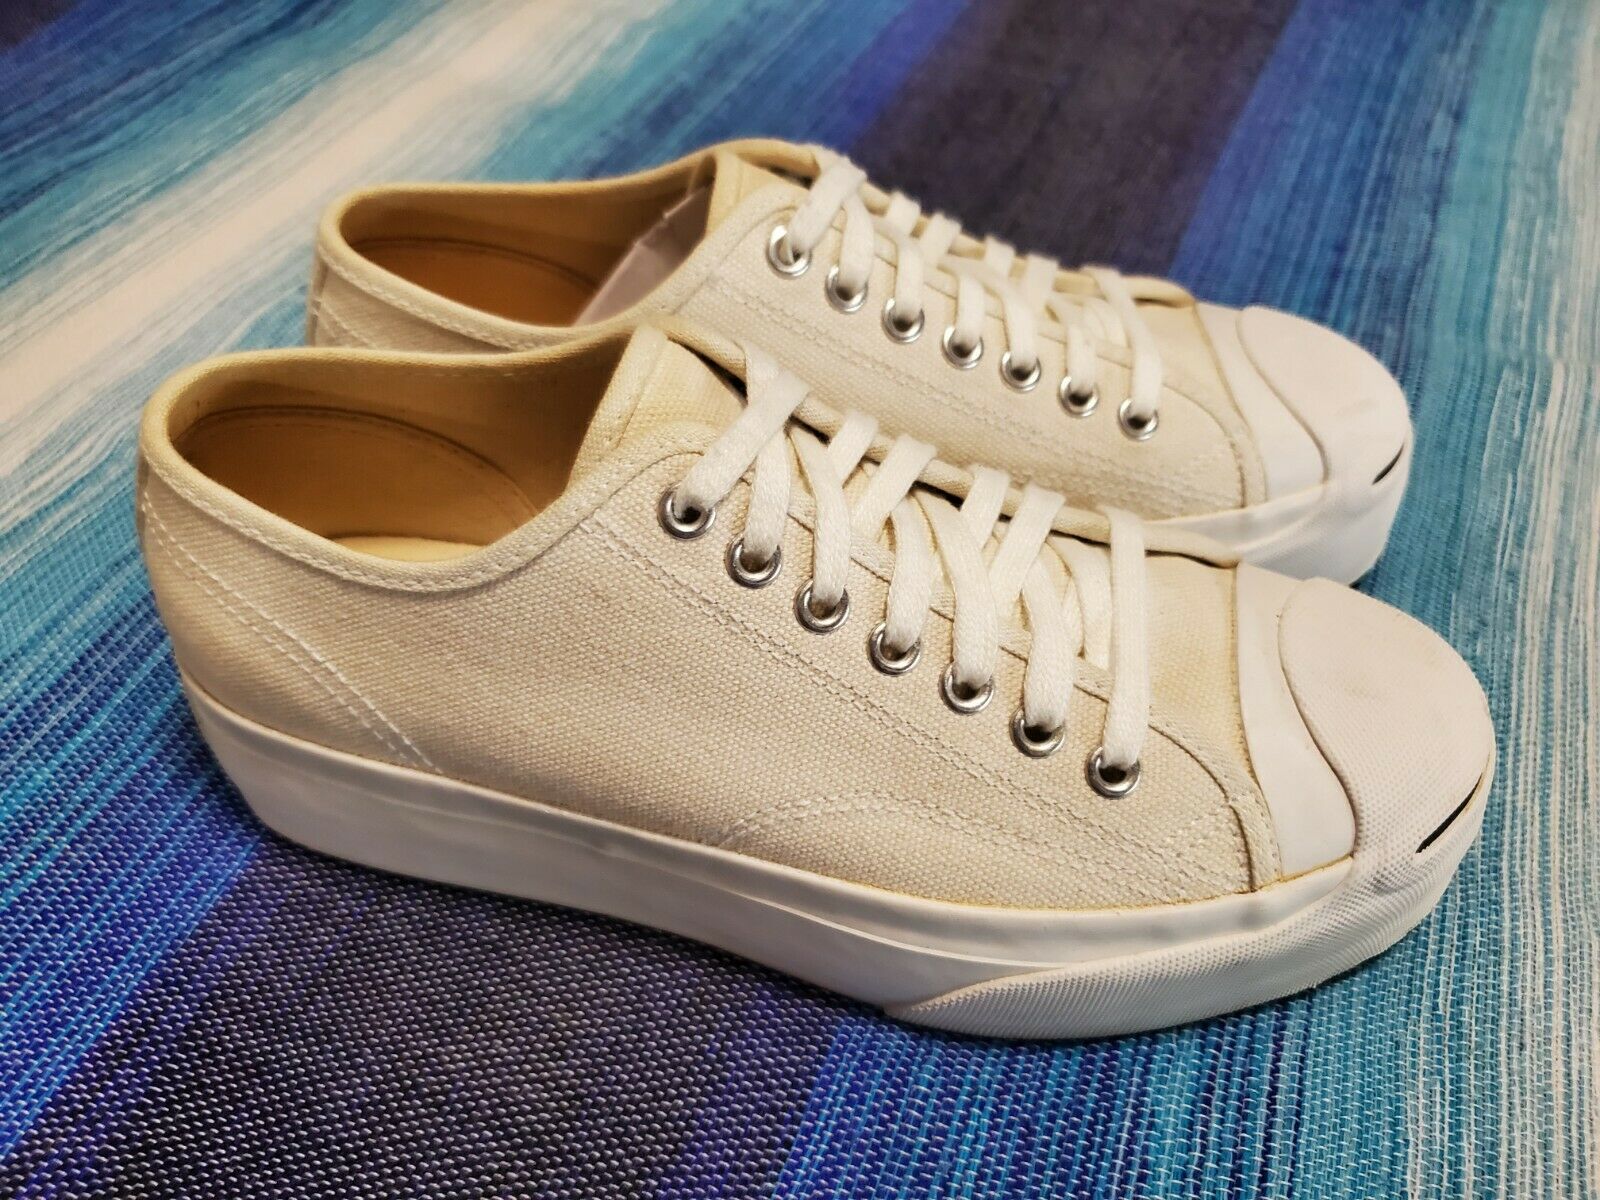 Vtg Converse Jack Purcell Natural Ivory Platform Sneakers, Women's 8.5